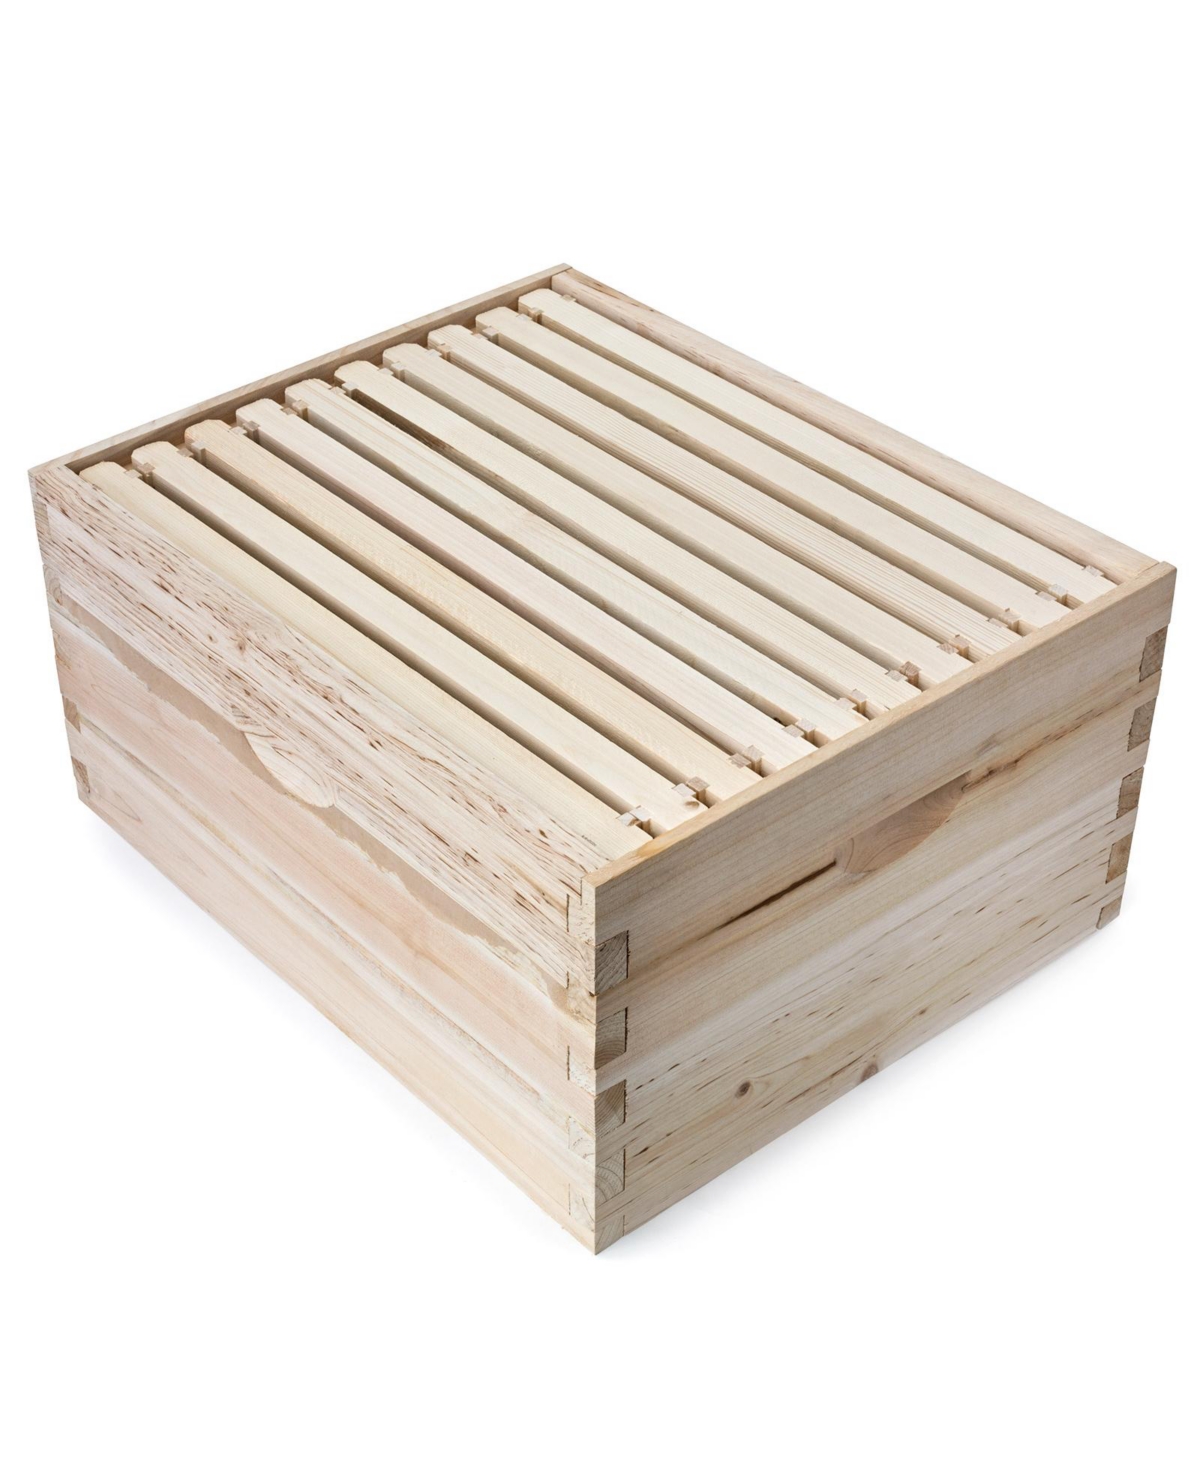 Beehive 10 Frame Kit Super Box and 10 Deep Frames with Foundations for Langstroth Beekeeping - Fir wood